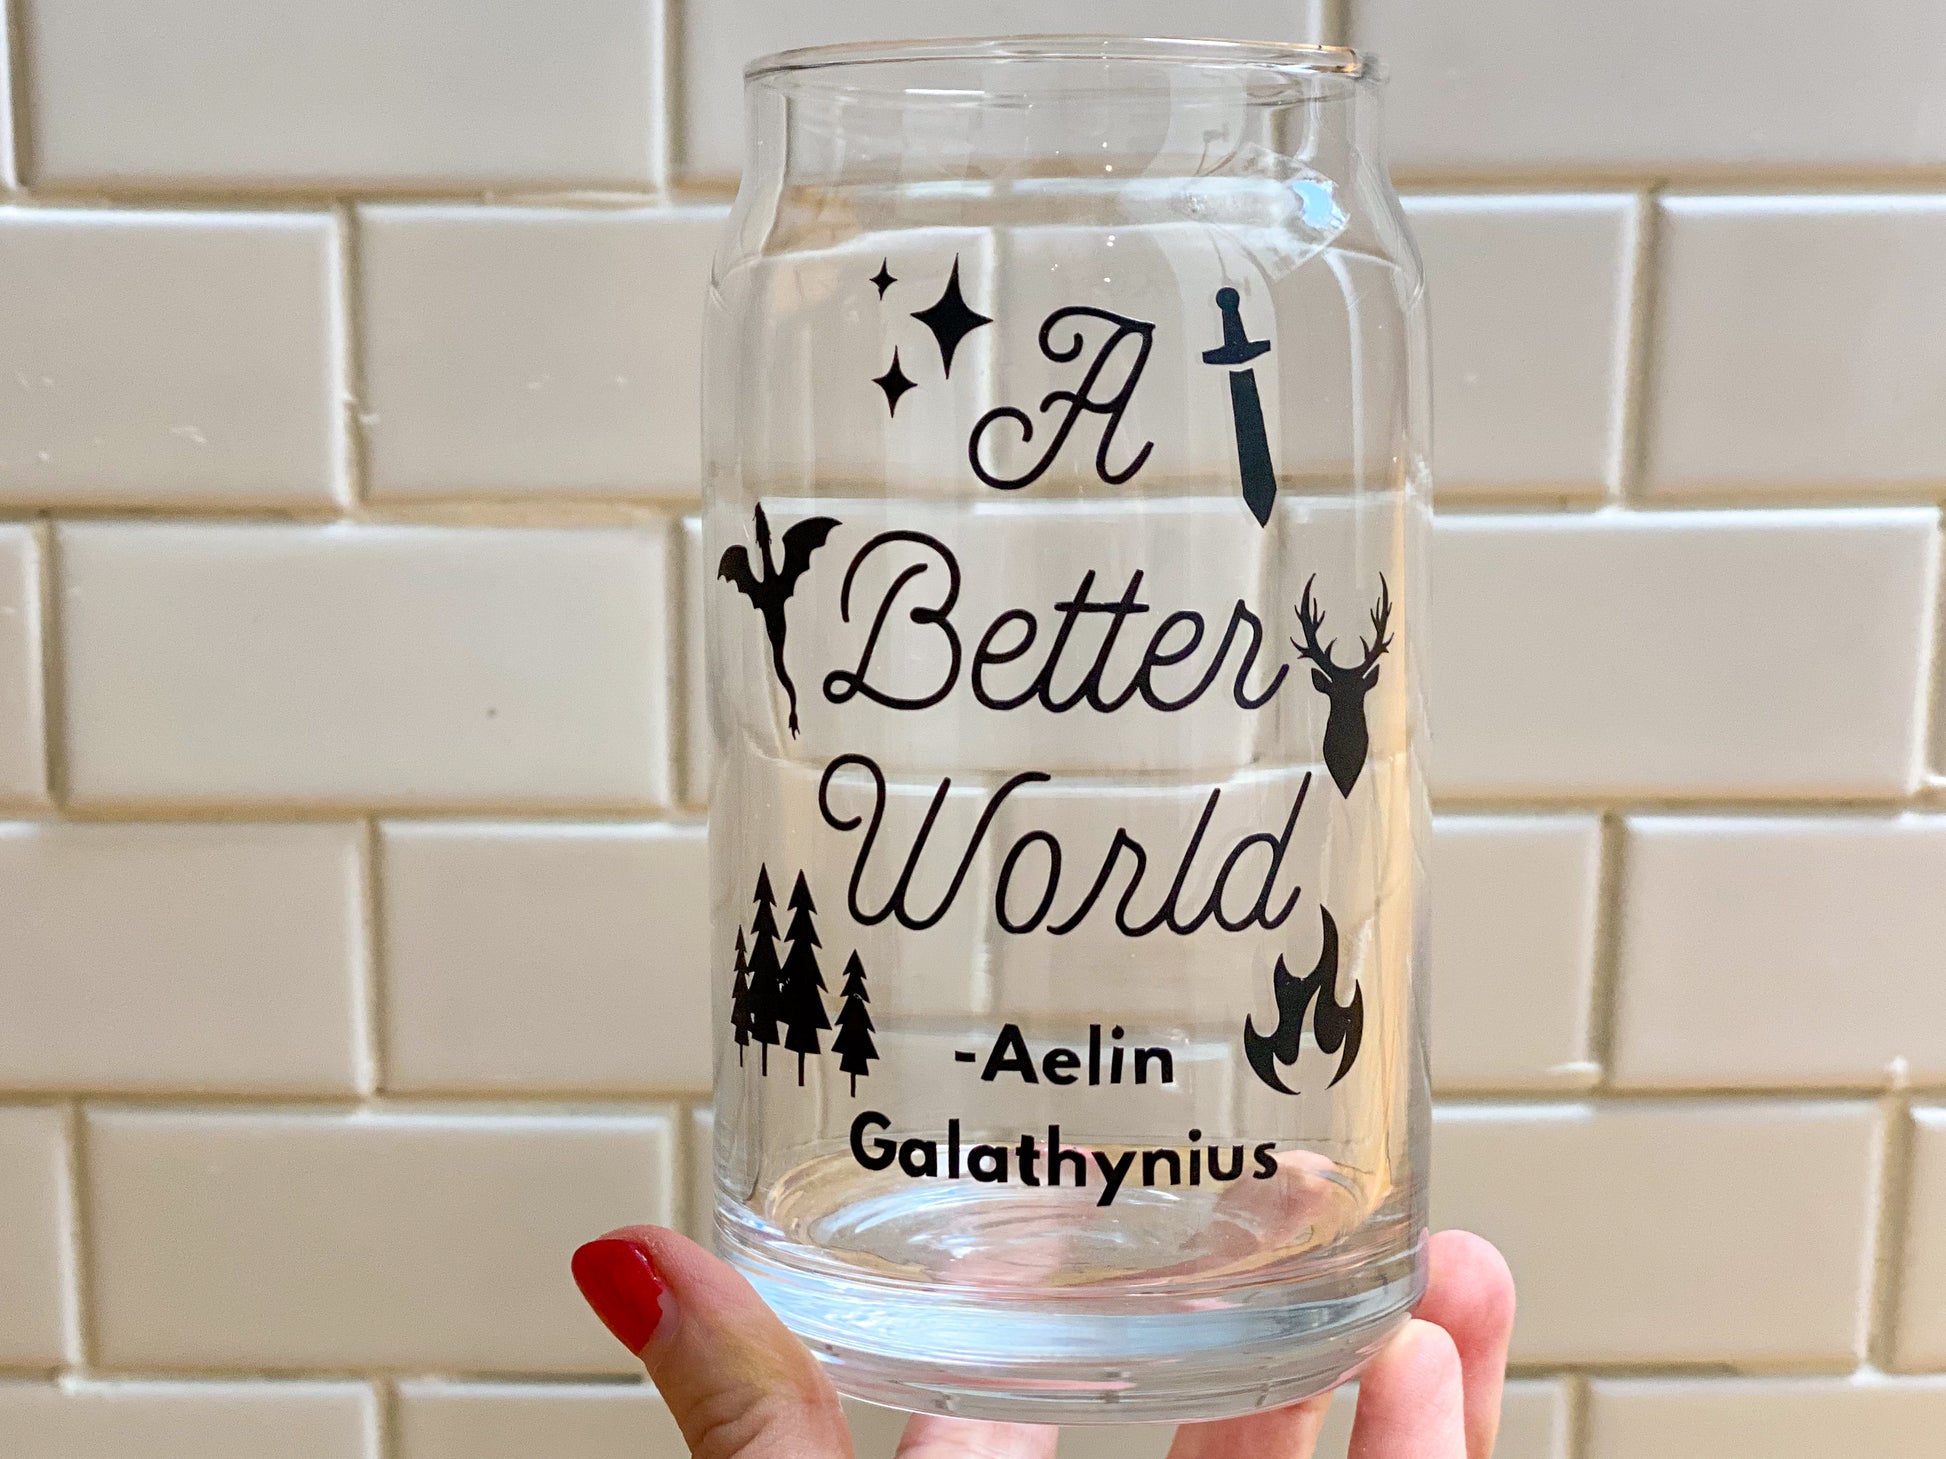 Glass cup for throne of glass book lovers with the quote from aelin galathynius that says a bettwe rold with 6 icons of stars, sword, wyrven, stag, pine trees, and fire on it, all in a black font, white subway tile background with cup in hand